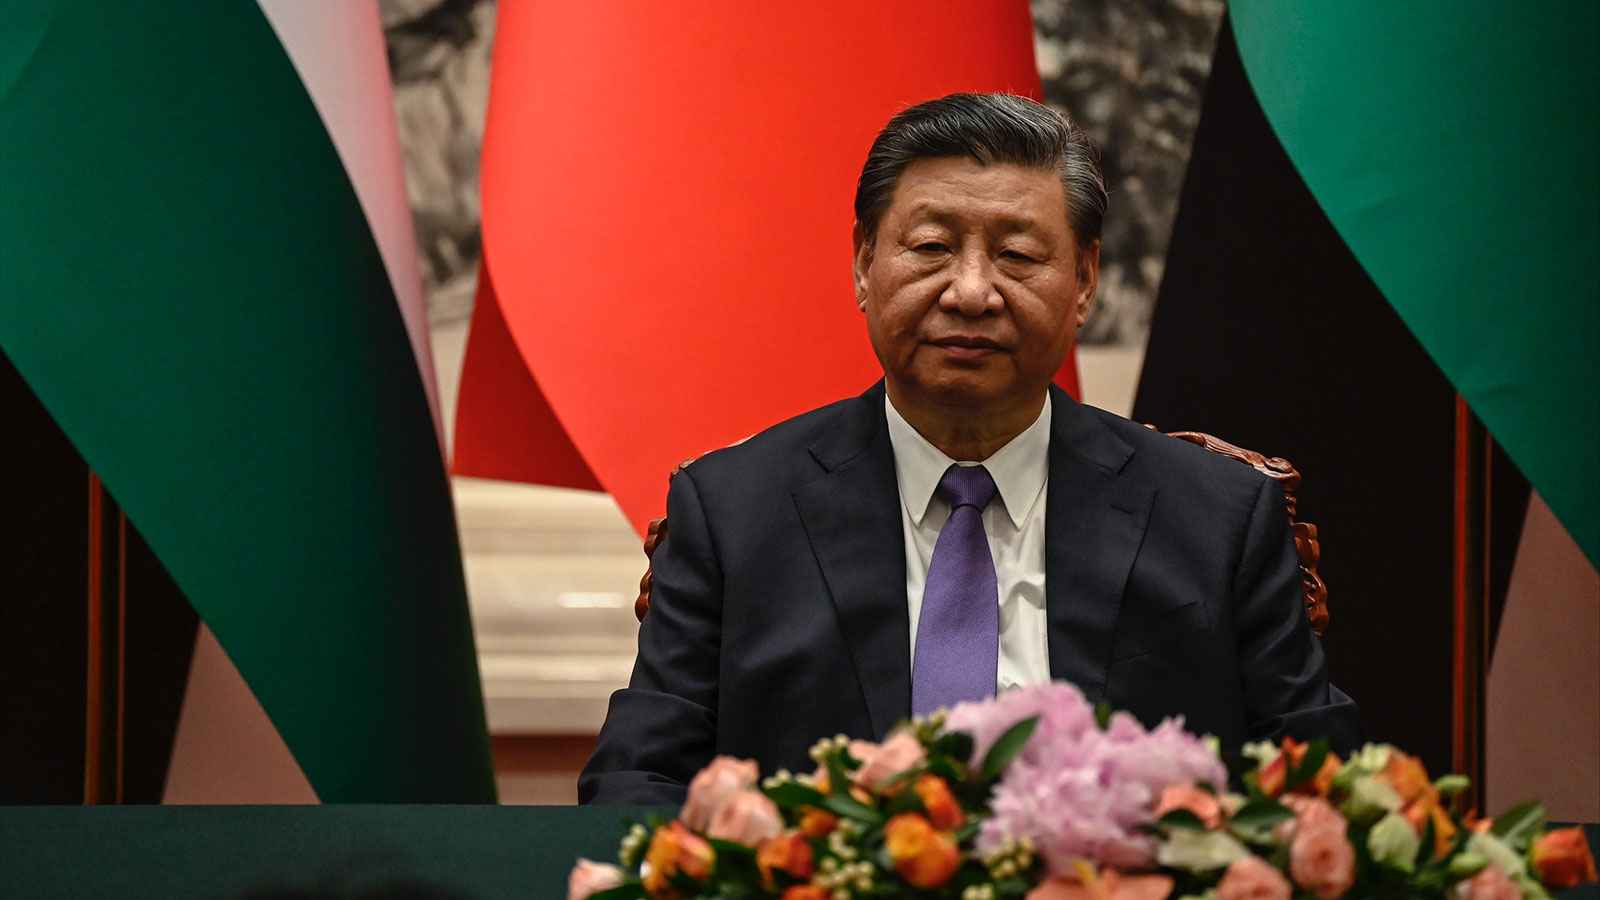 Chinese President Xi Jinping attends attends a signing ceremony in Beijing on June 14.